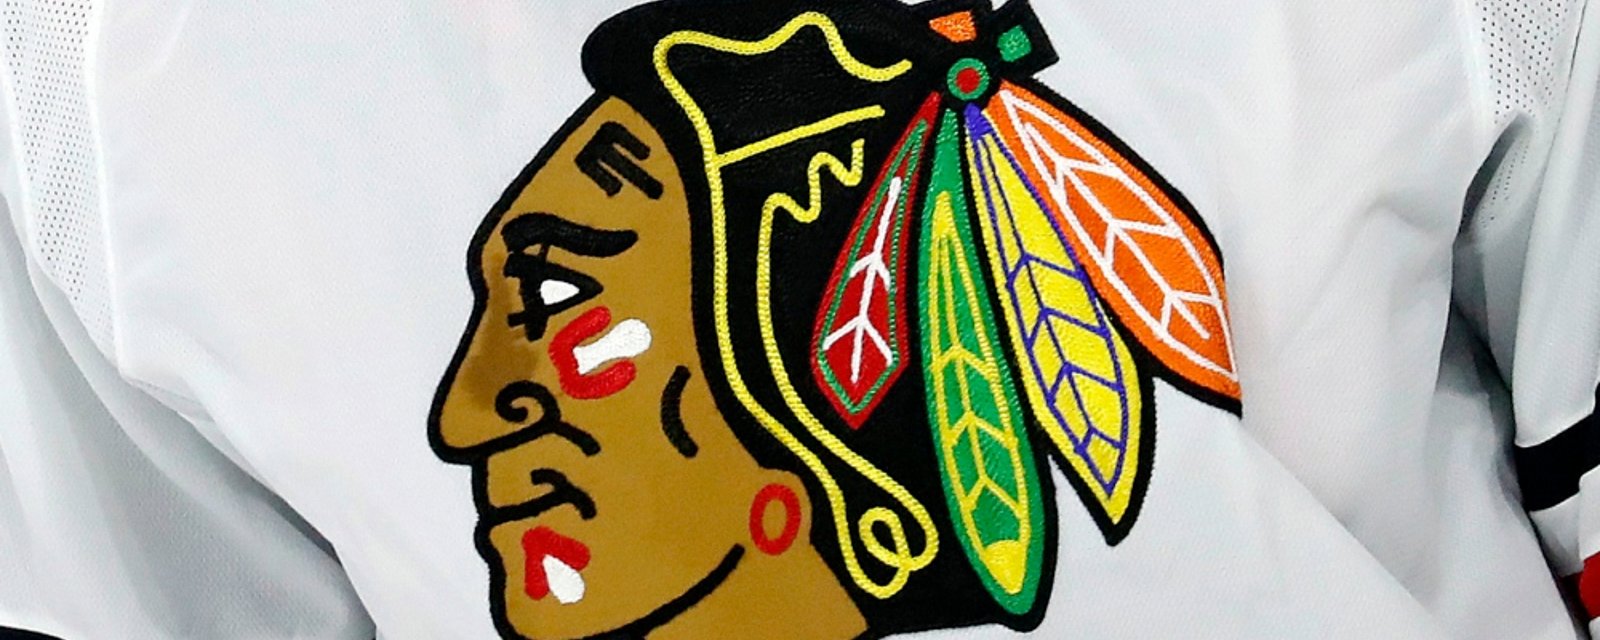 Report: Former Blackhawks' players refuse to cooperate in abuse investigation